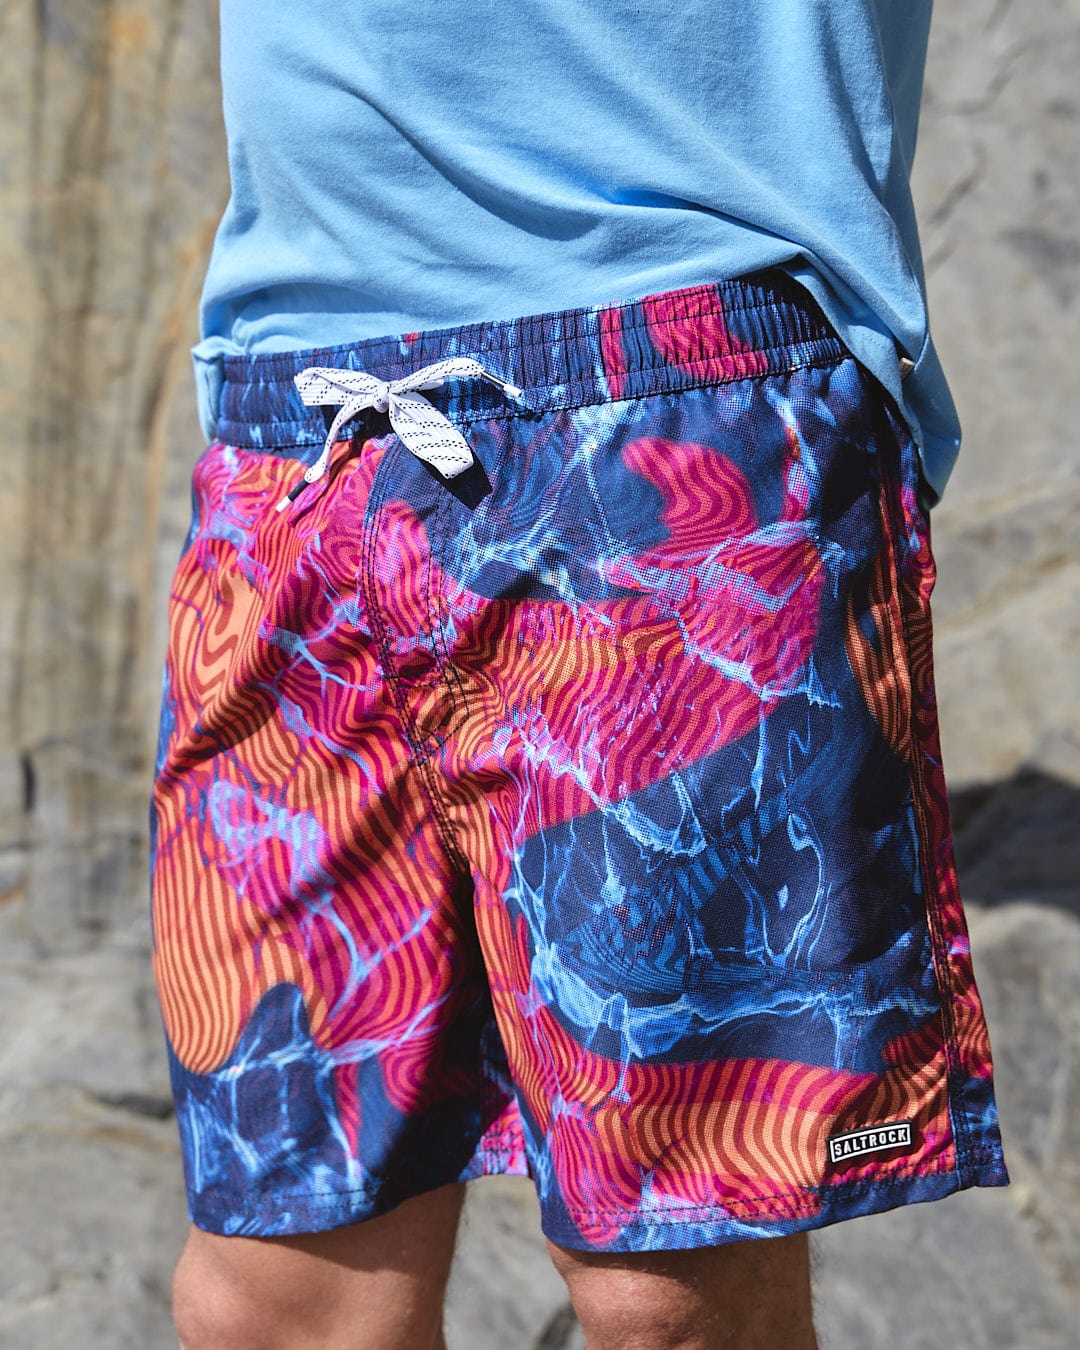 A man wearing a Saltrock Poolside - Mens All Over Print Swimshort in Teal shirt and blue shorts.